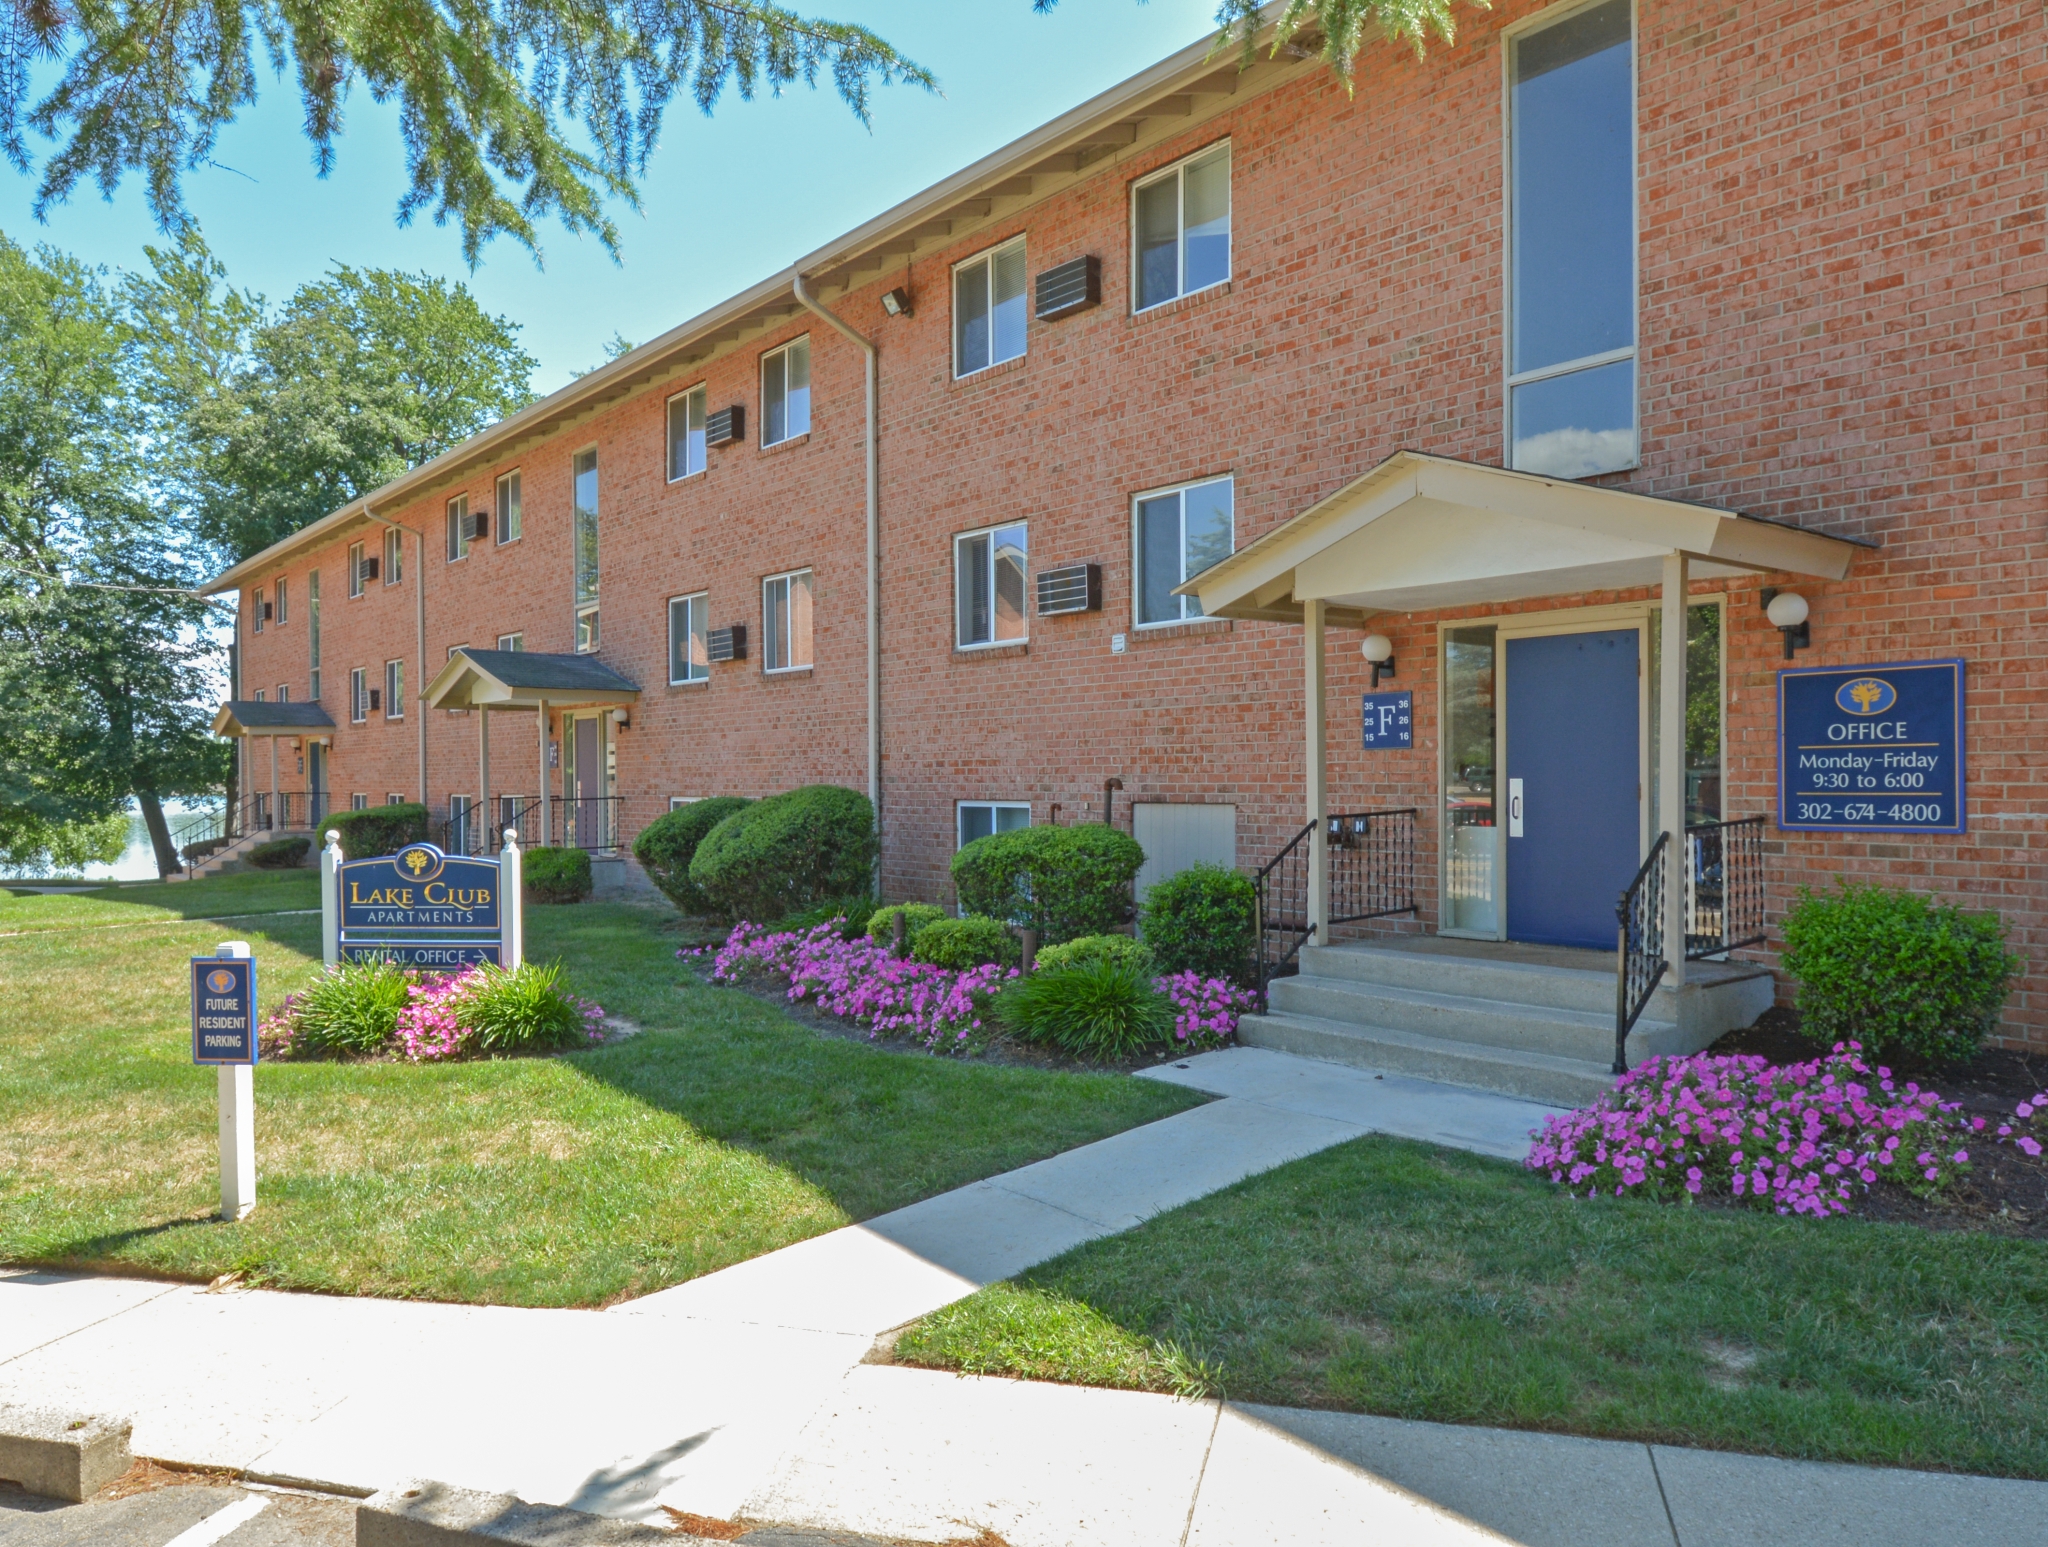 Friendly Office Staff | Dover DE Apartments For Rent | Lake Club Apartments